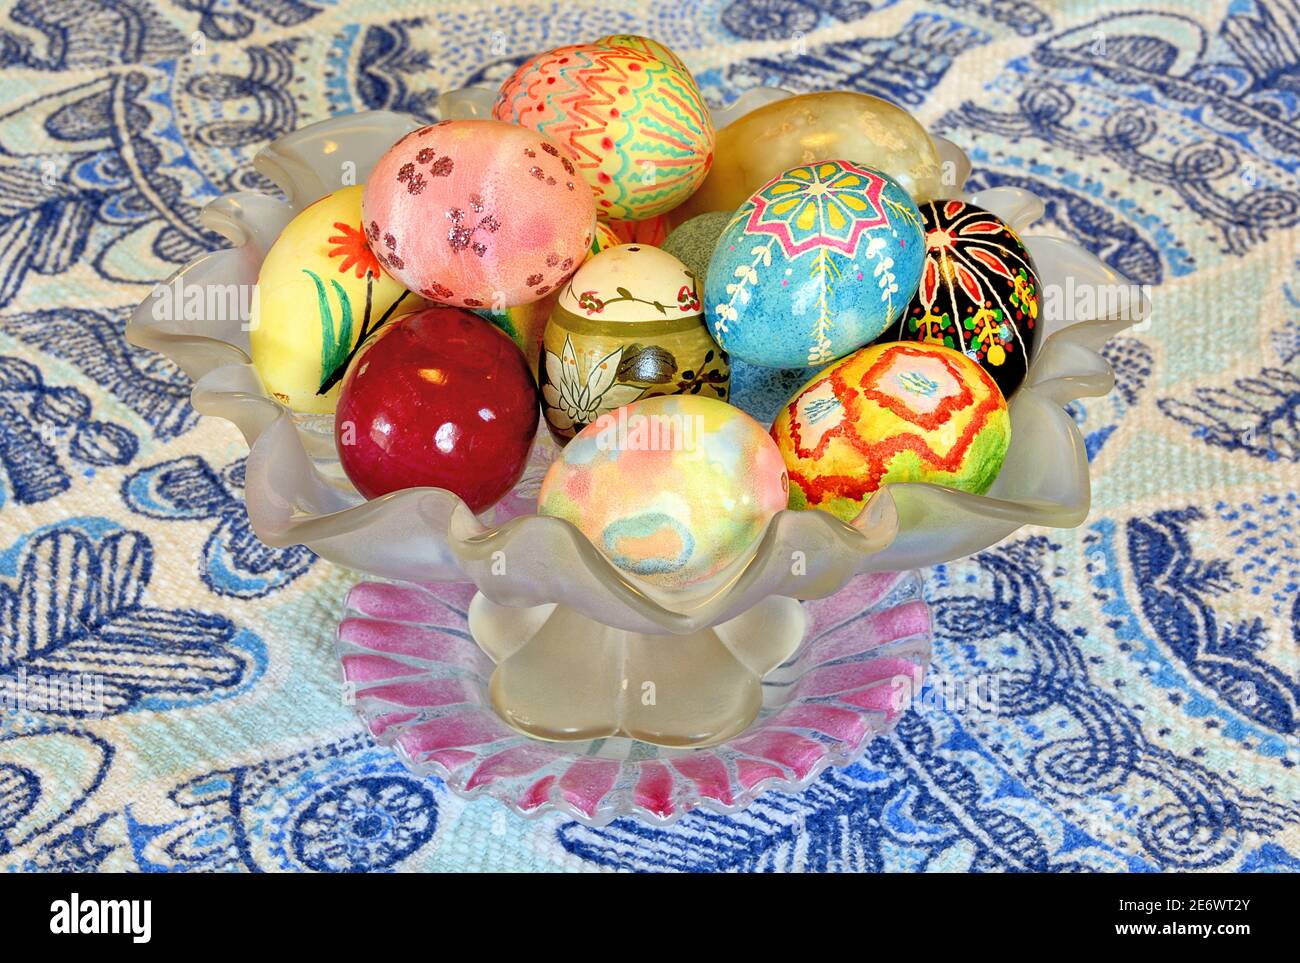 Seasonal Easter theme. Artistic arrangement of colorful and ornate hand-painted easter eggs in vintage glass bowl. Stock Photo